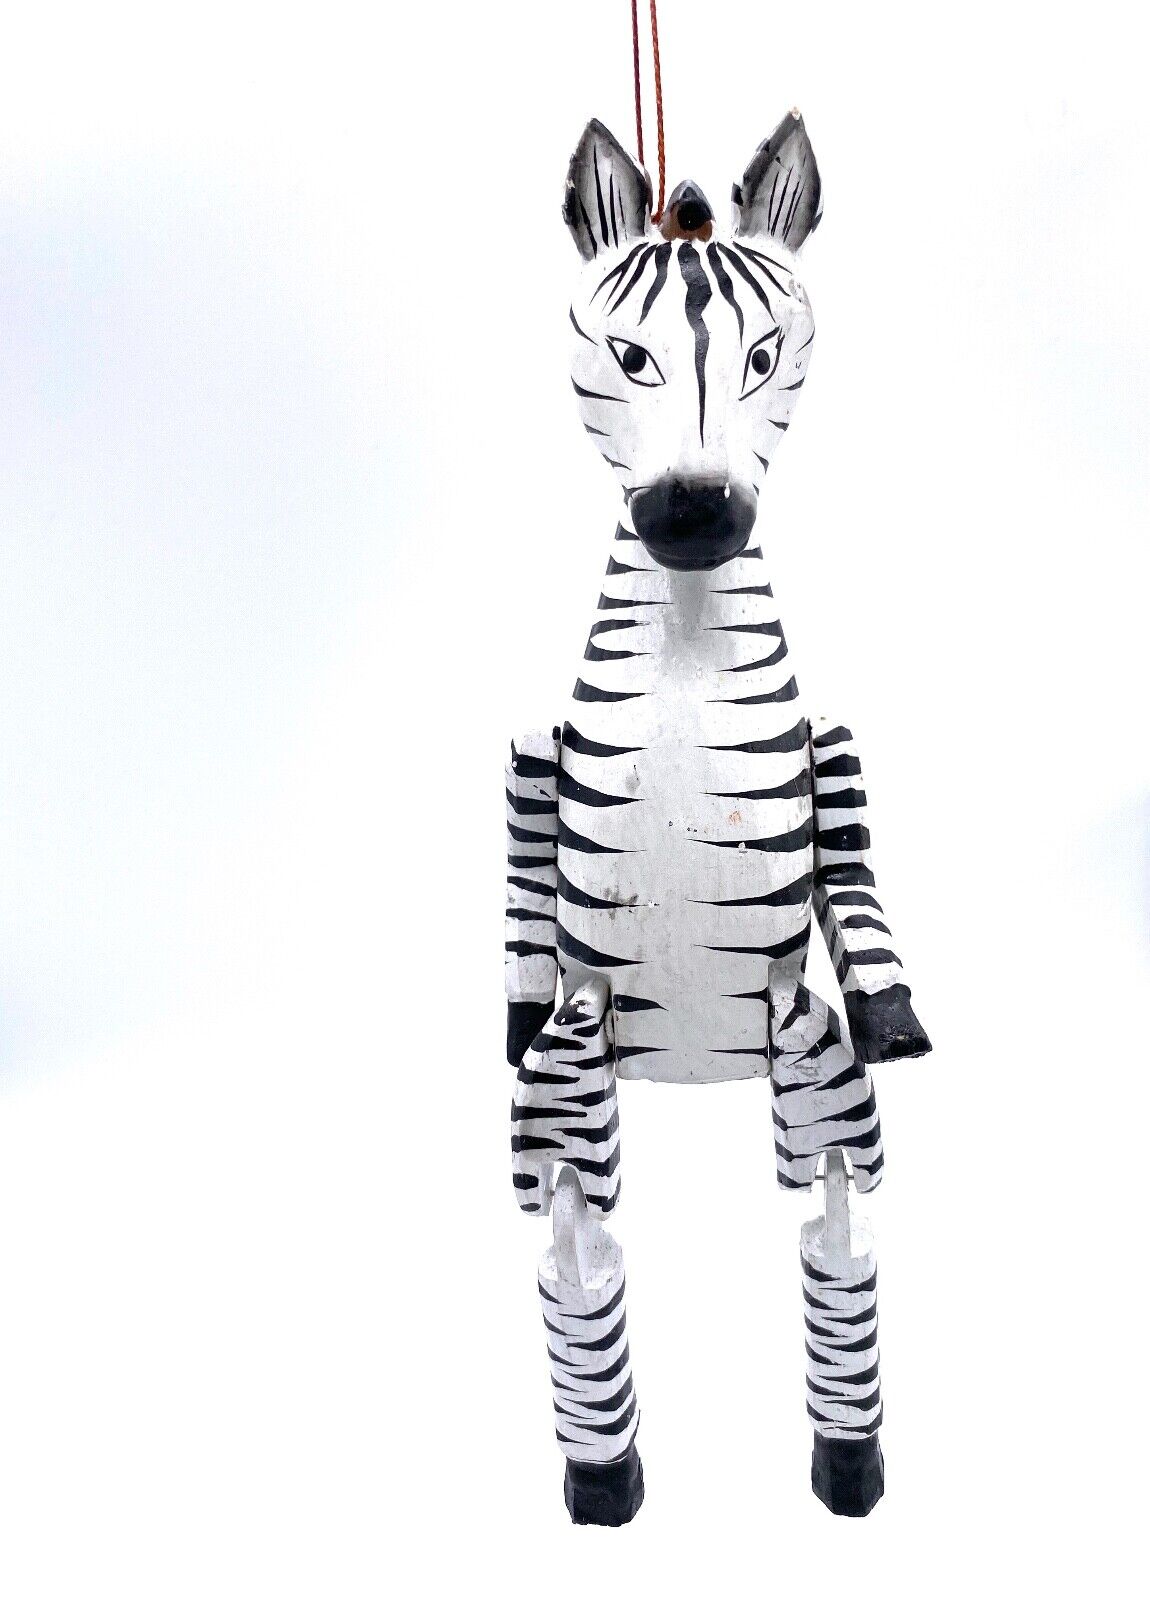  Zebra Puppet Ornament Hand Carved and Painted Reclaimed Wood